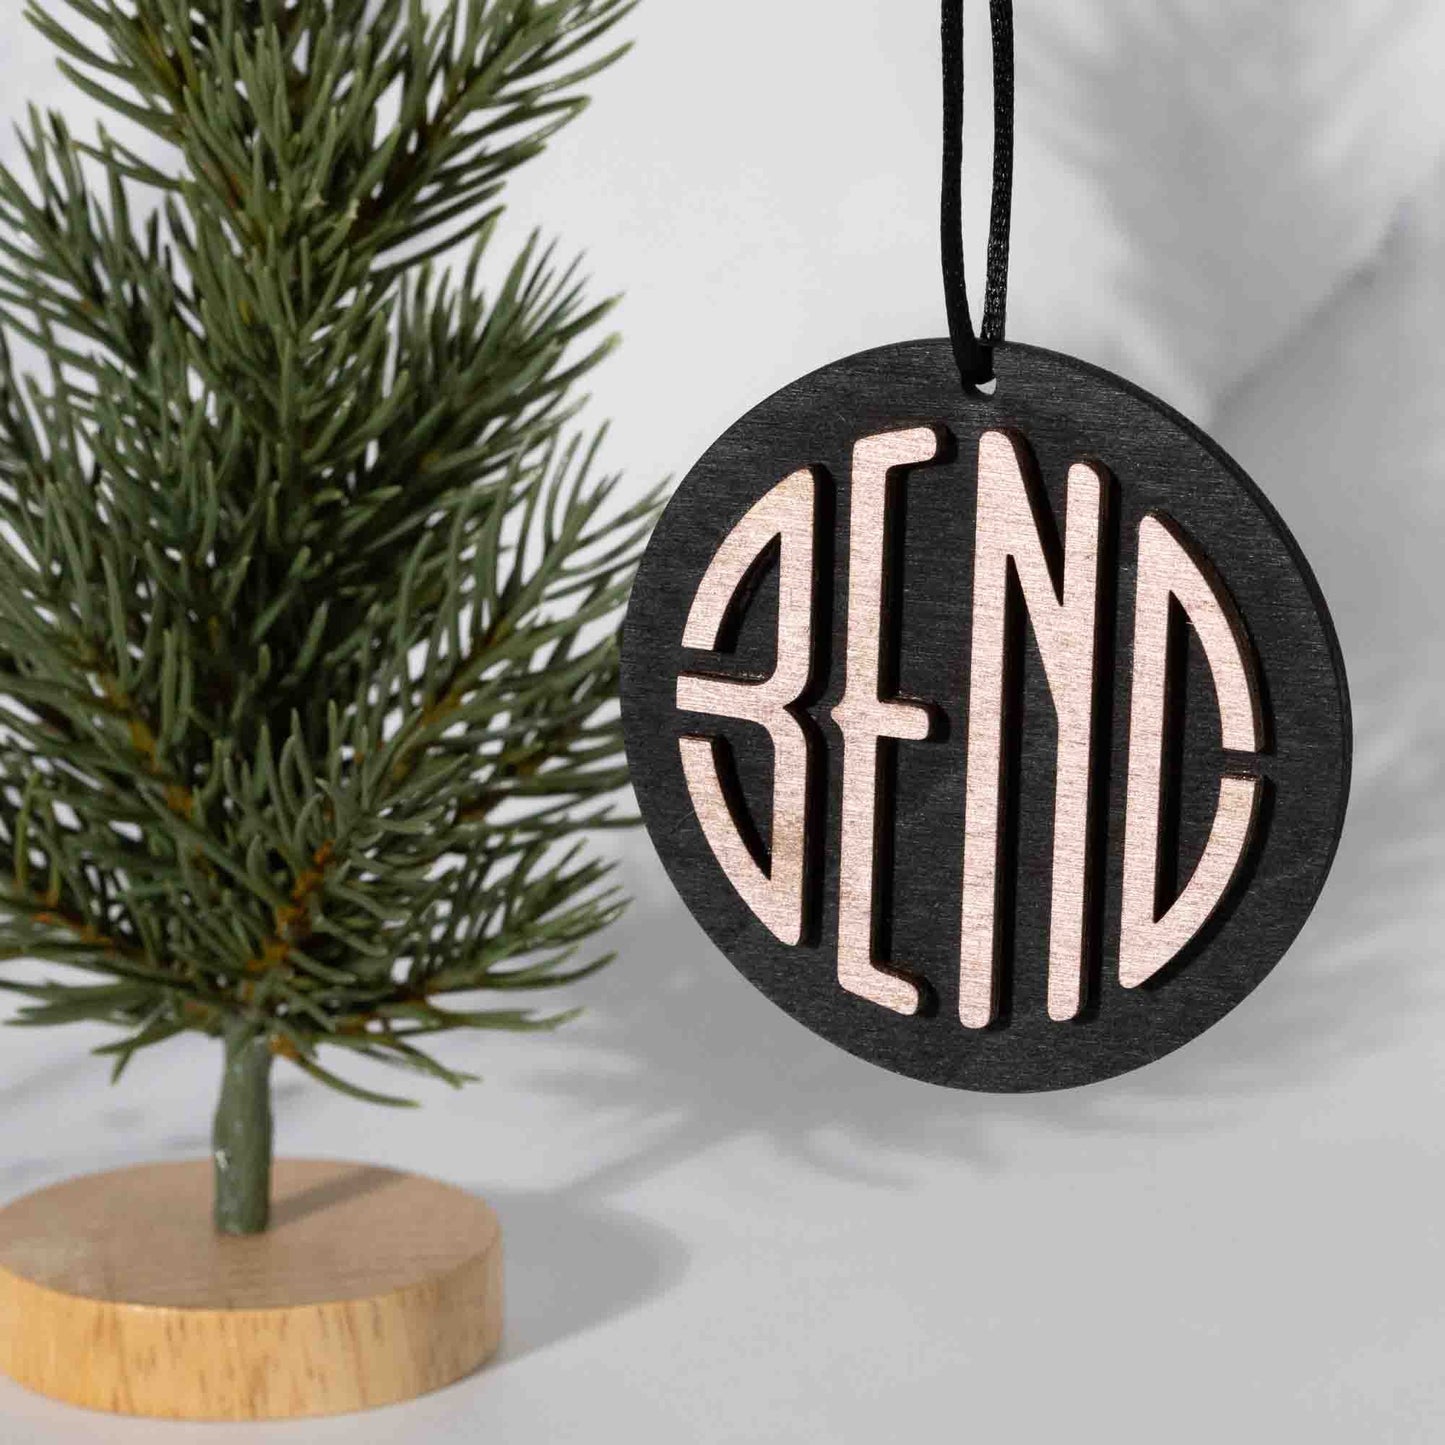 State Christmas Ornaments: Bend, Oregon (Layered) - LeeMo Designs